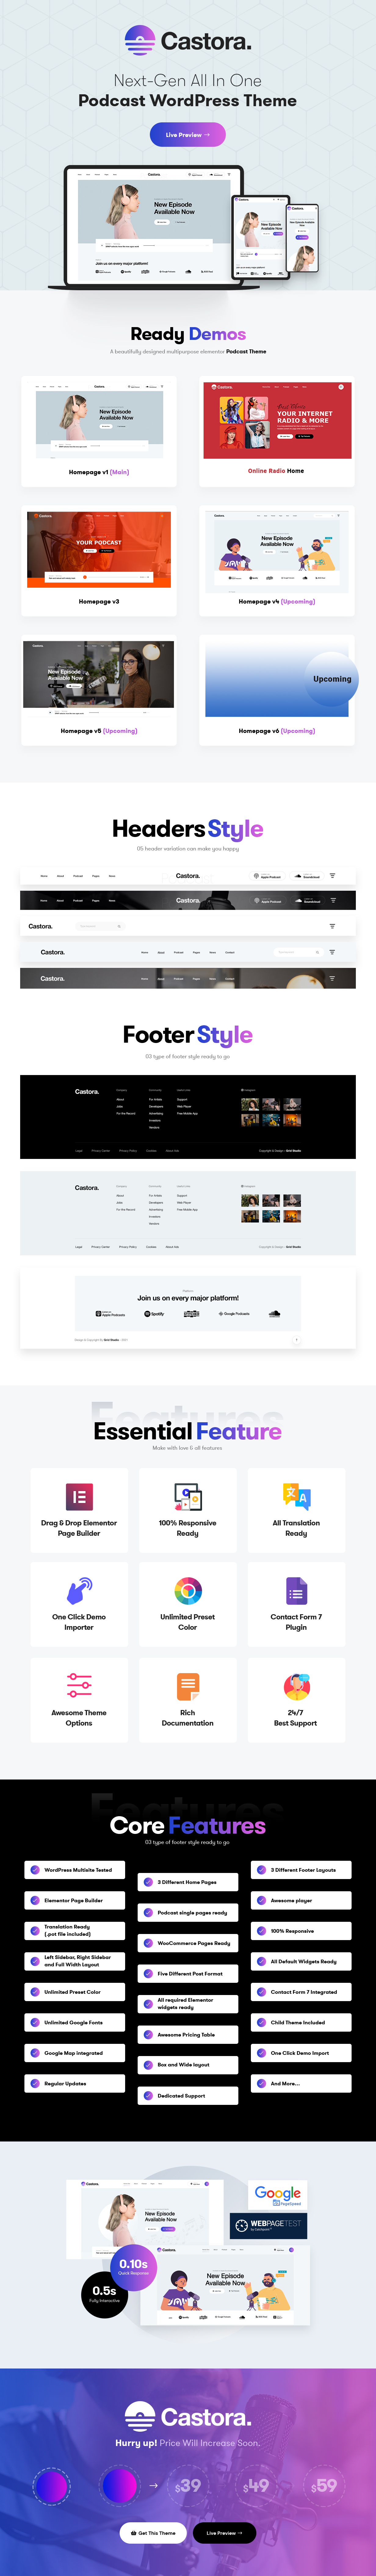 A lot of different pages of castora podcast WordPress theme.